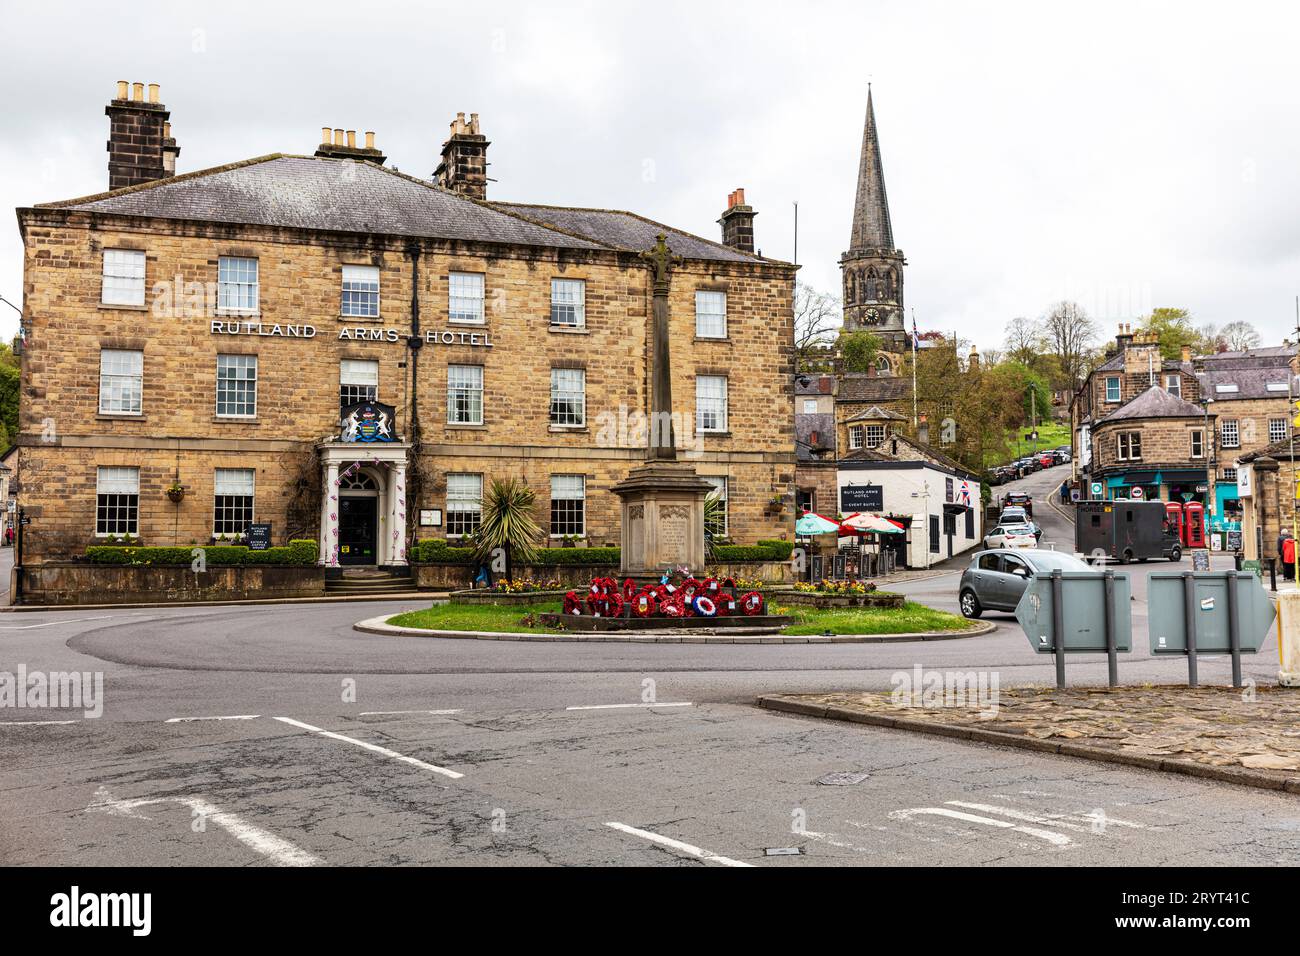 Bakewell, Derbyshire, UK, England, Bakewell town, Bakewell UK, Bakewell Derbyshire, Bakewell England, Town, market town, centre, houses, Stock Photo